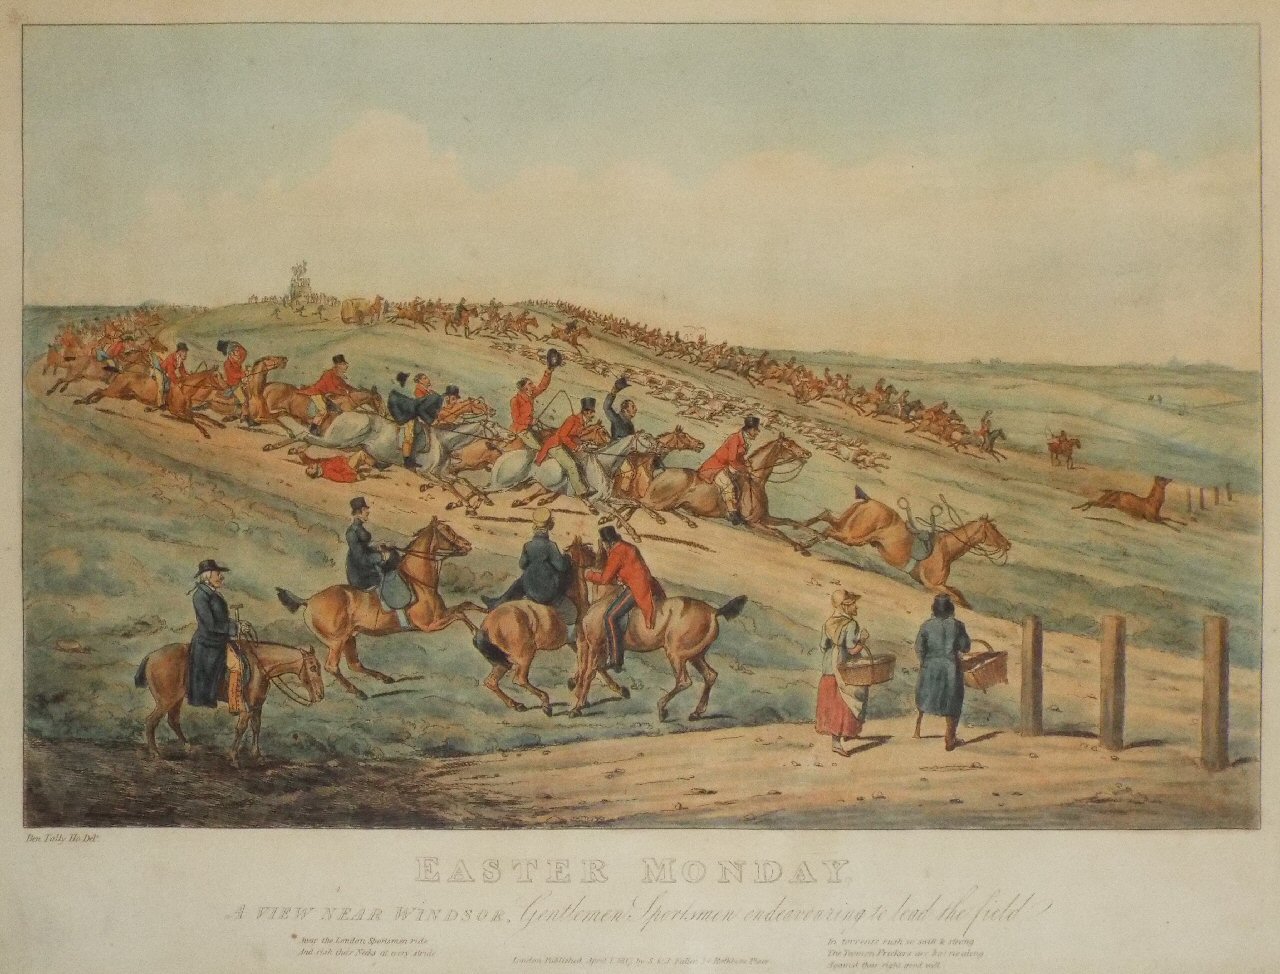 Soft-ground Etching - Easter Monday. A View near Windsor, Gentlemen Sportsmen endeavouring to lead the field.